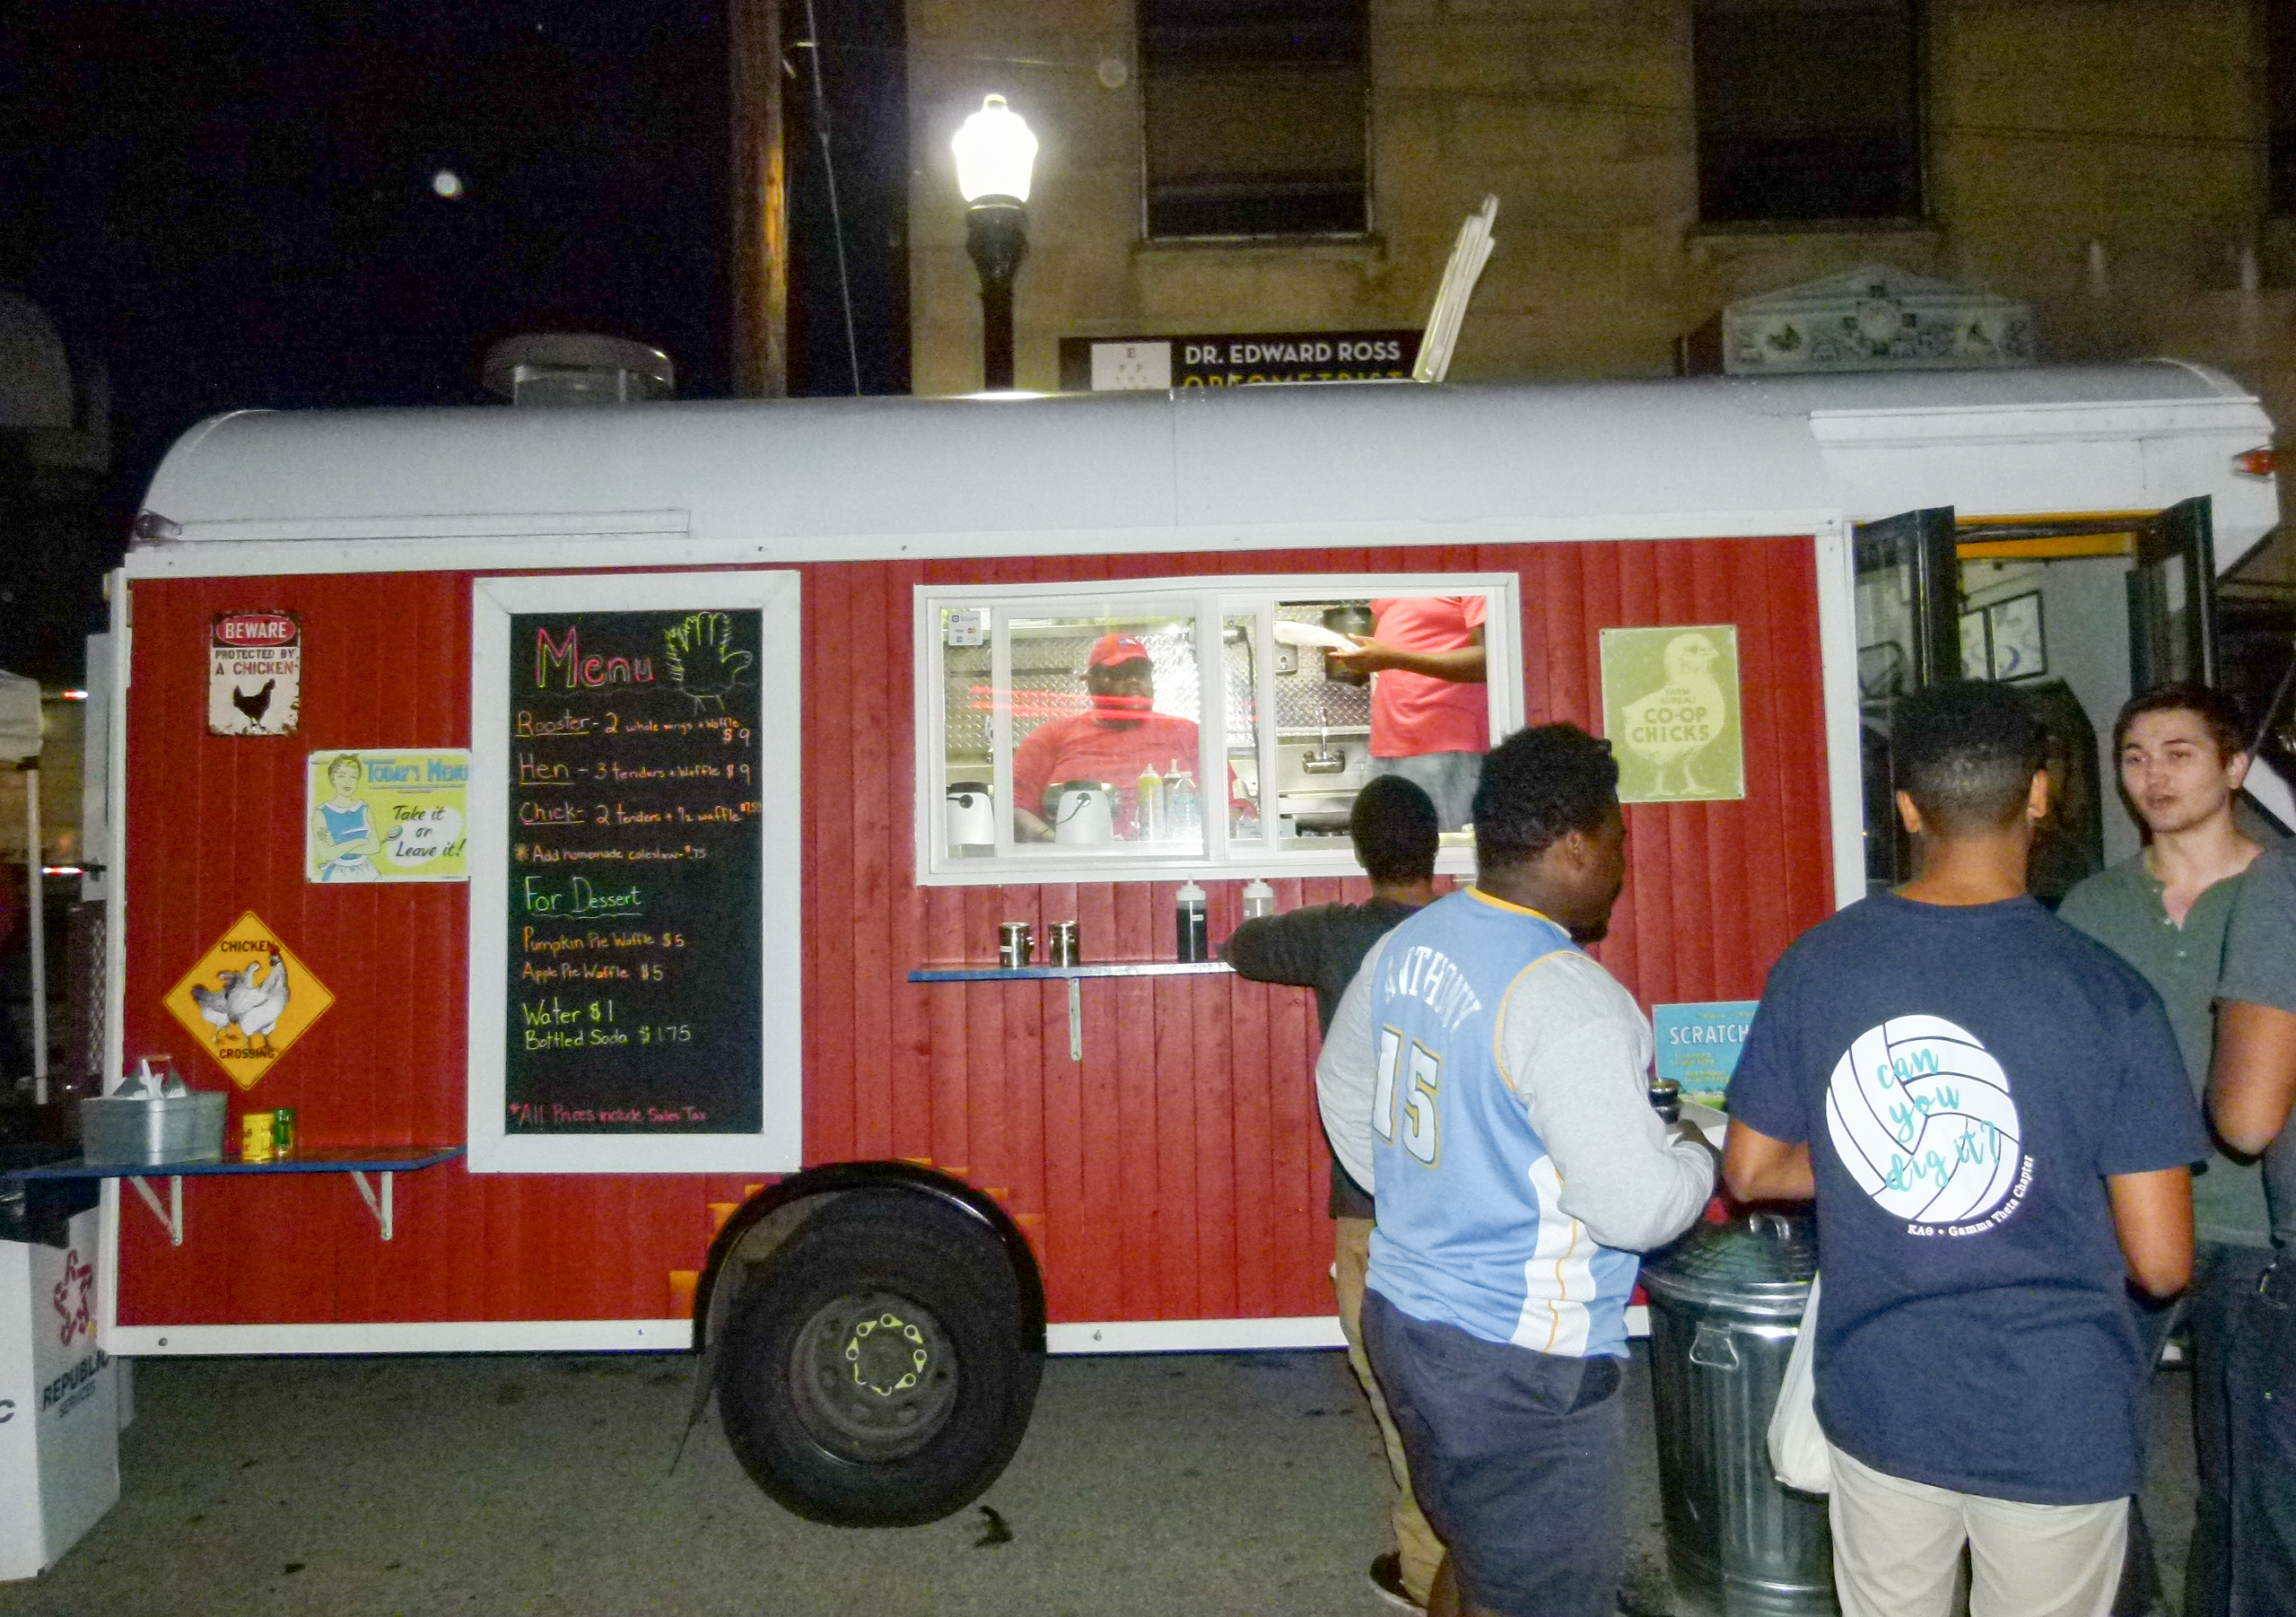 The Coop Chicken and Waffles food truck on the scene. Earsell Fitzgerald (in window) prepares food for a customer while his brother Justin (standing in the truck) restocks. Also working in the truck is Nikki.